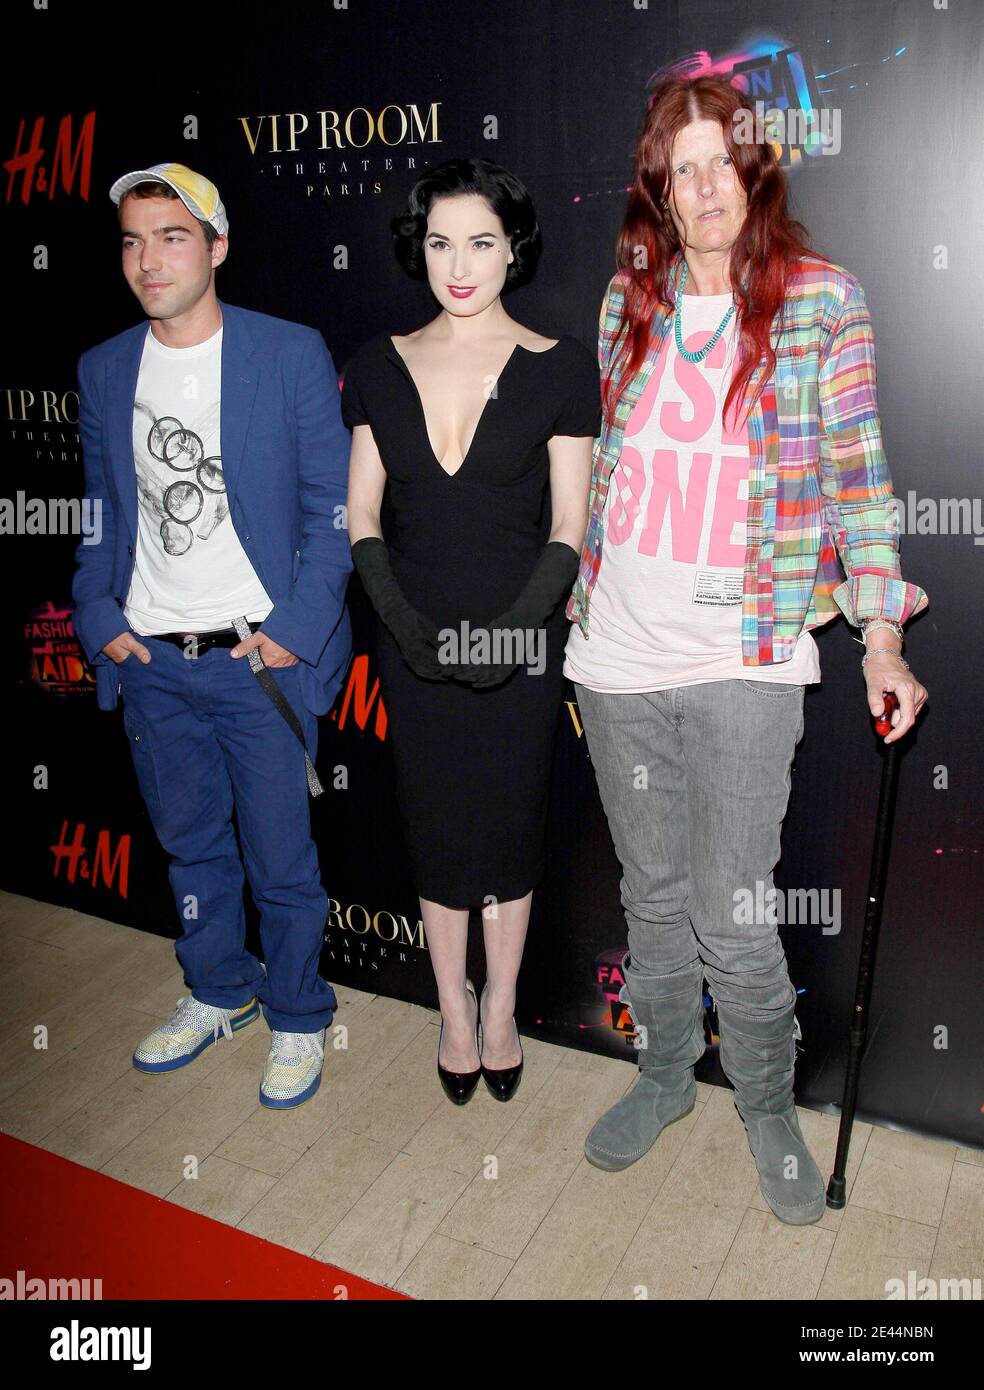 Xavier Barcala, Dita Von Teese and Ninette Murk arriving at VIP Room in  Paris, France, on